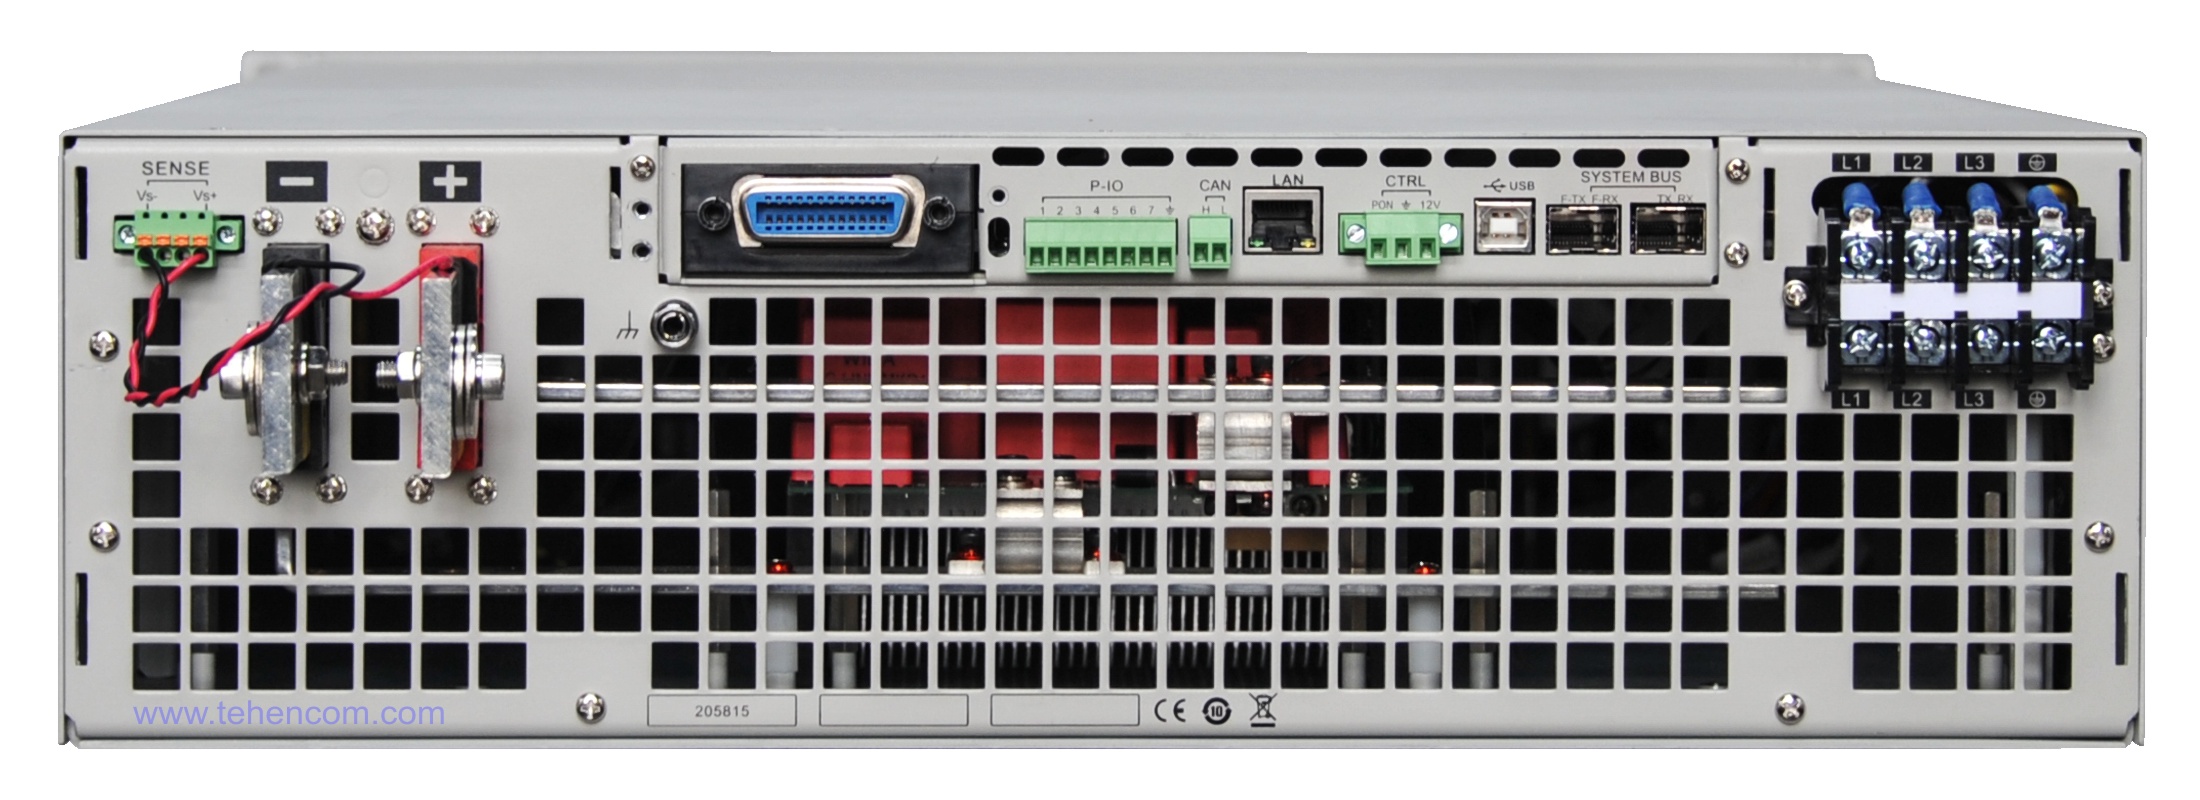 Rear panel of the ITECH IT6018C-500-90 model with a maximum output power of 18 kW.